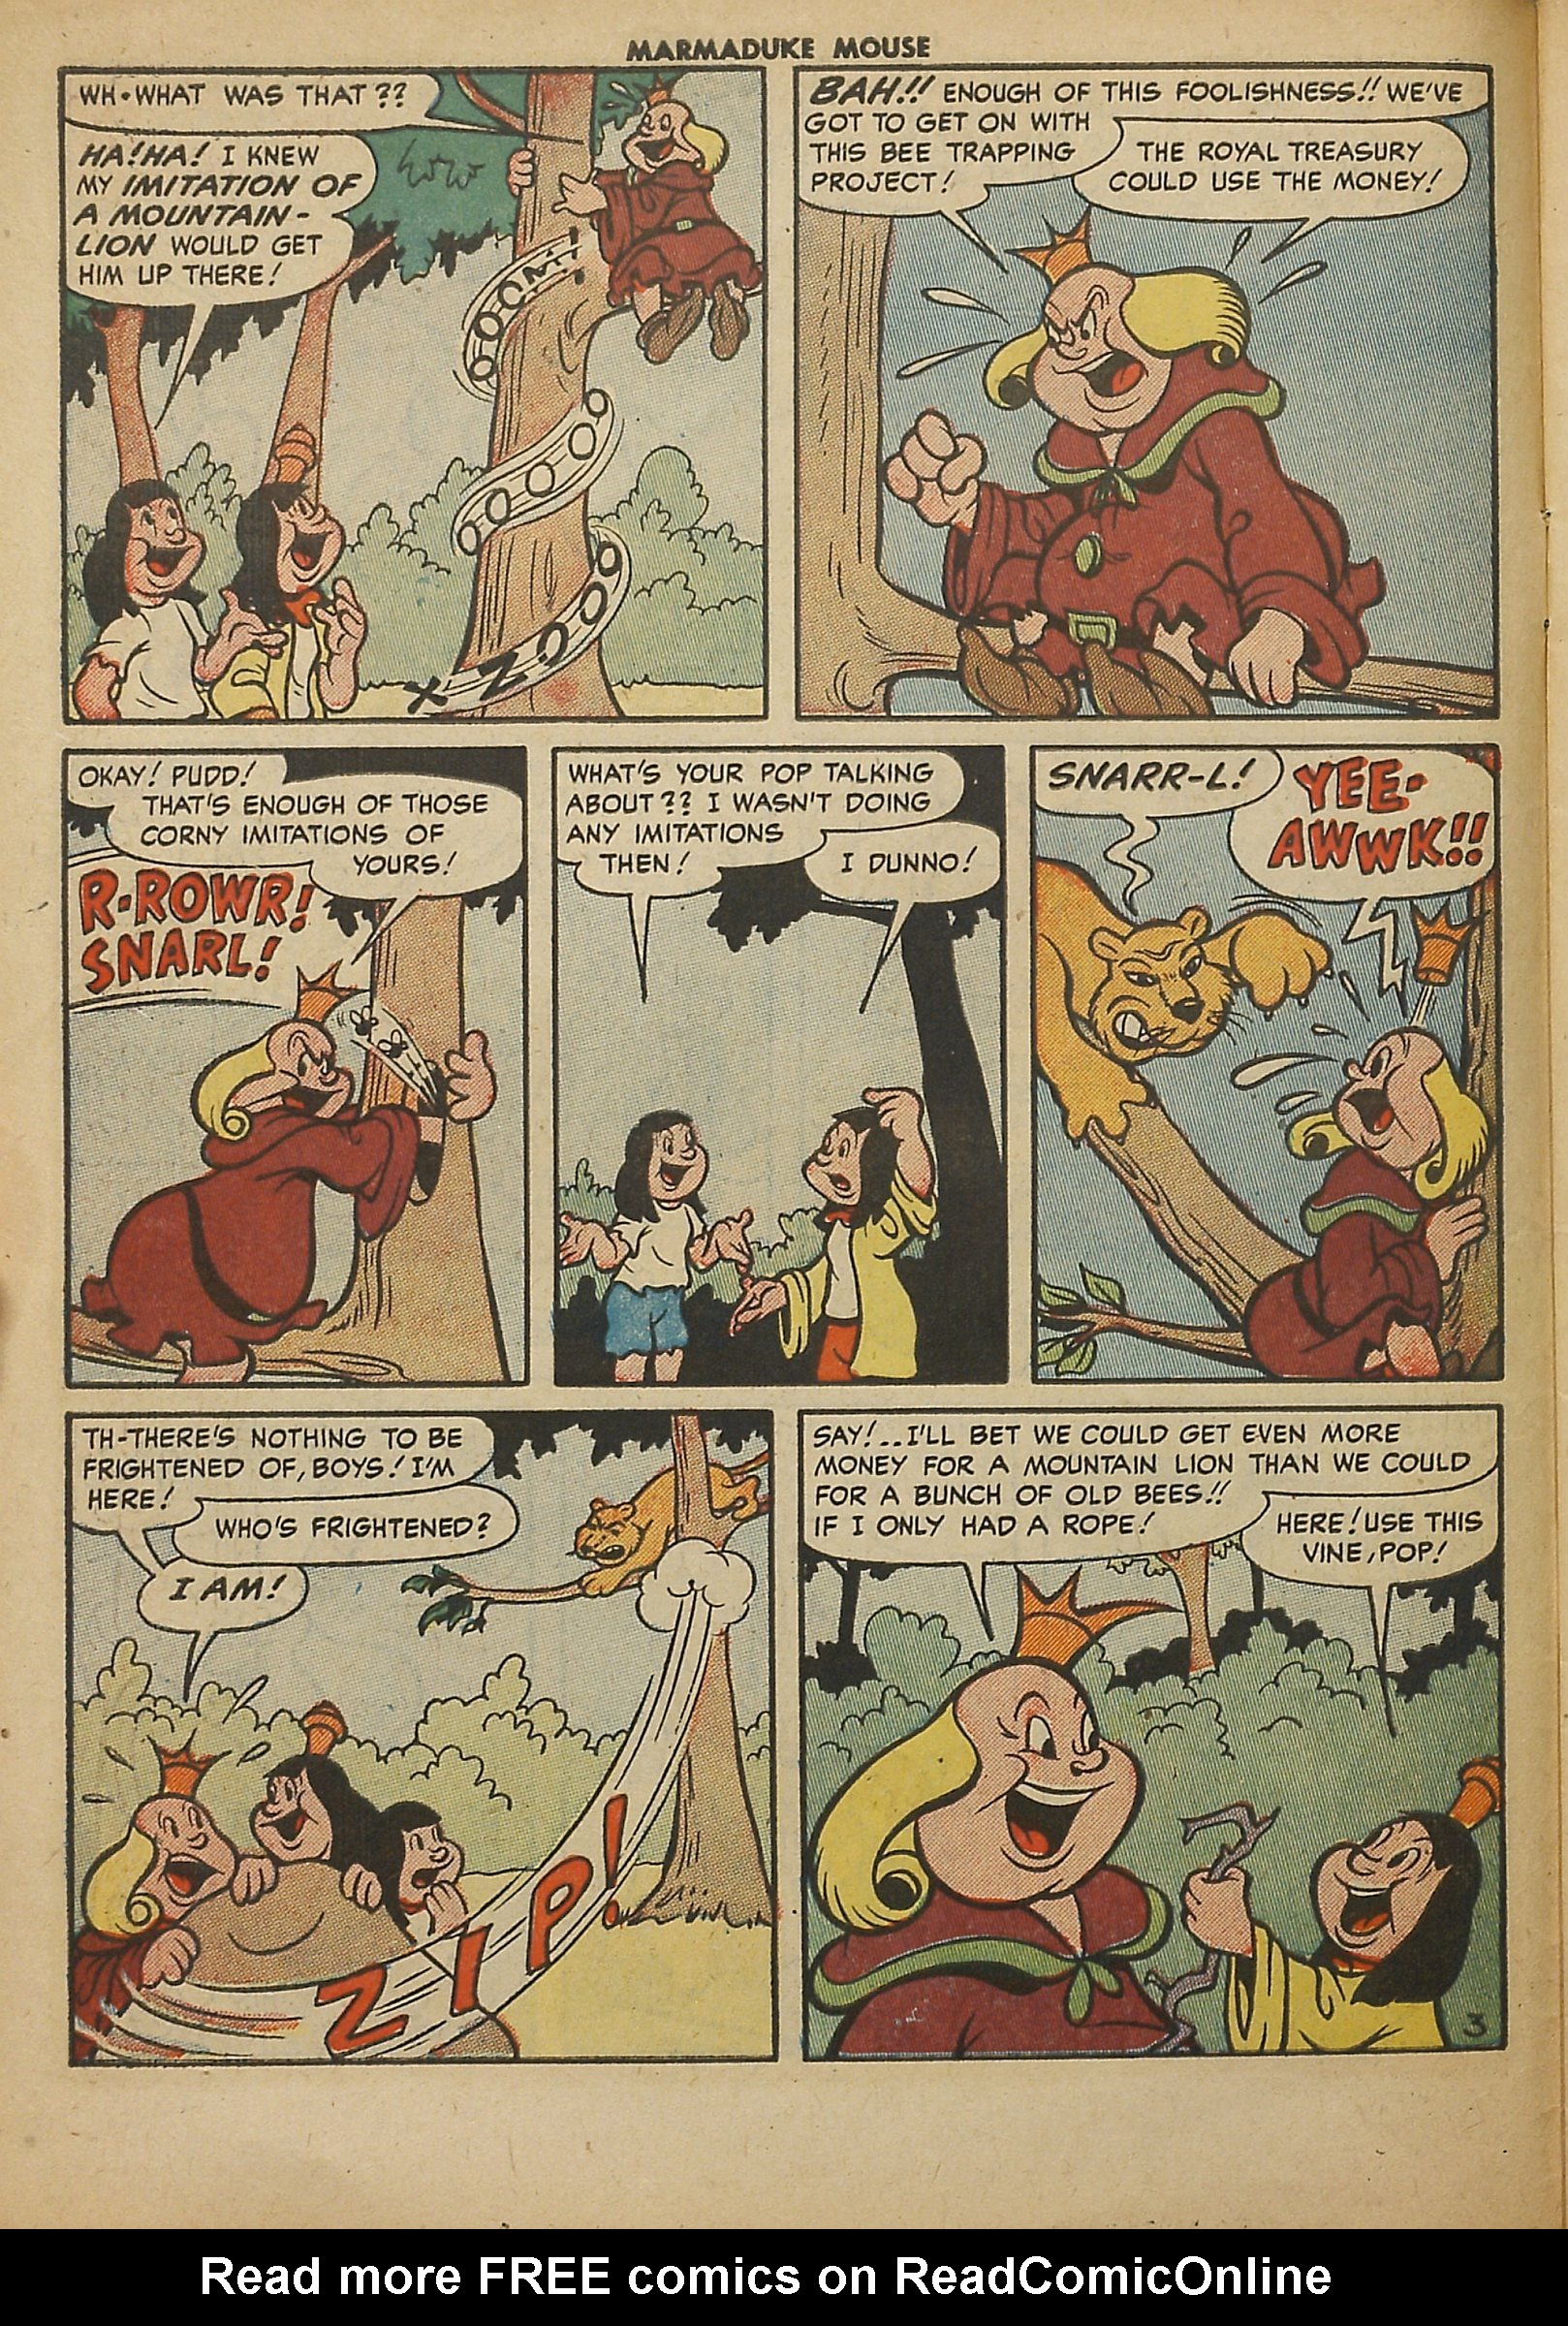 Read online Marmaduke Mouse comic -  Issue #48 - 10